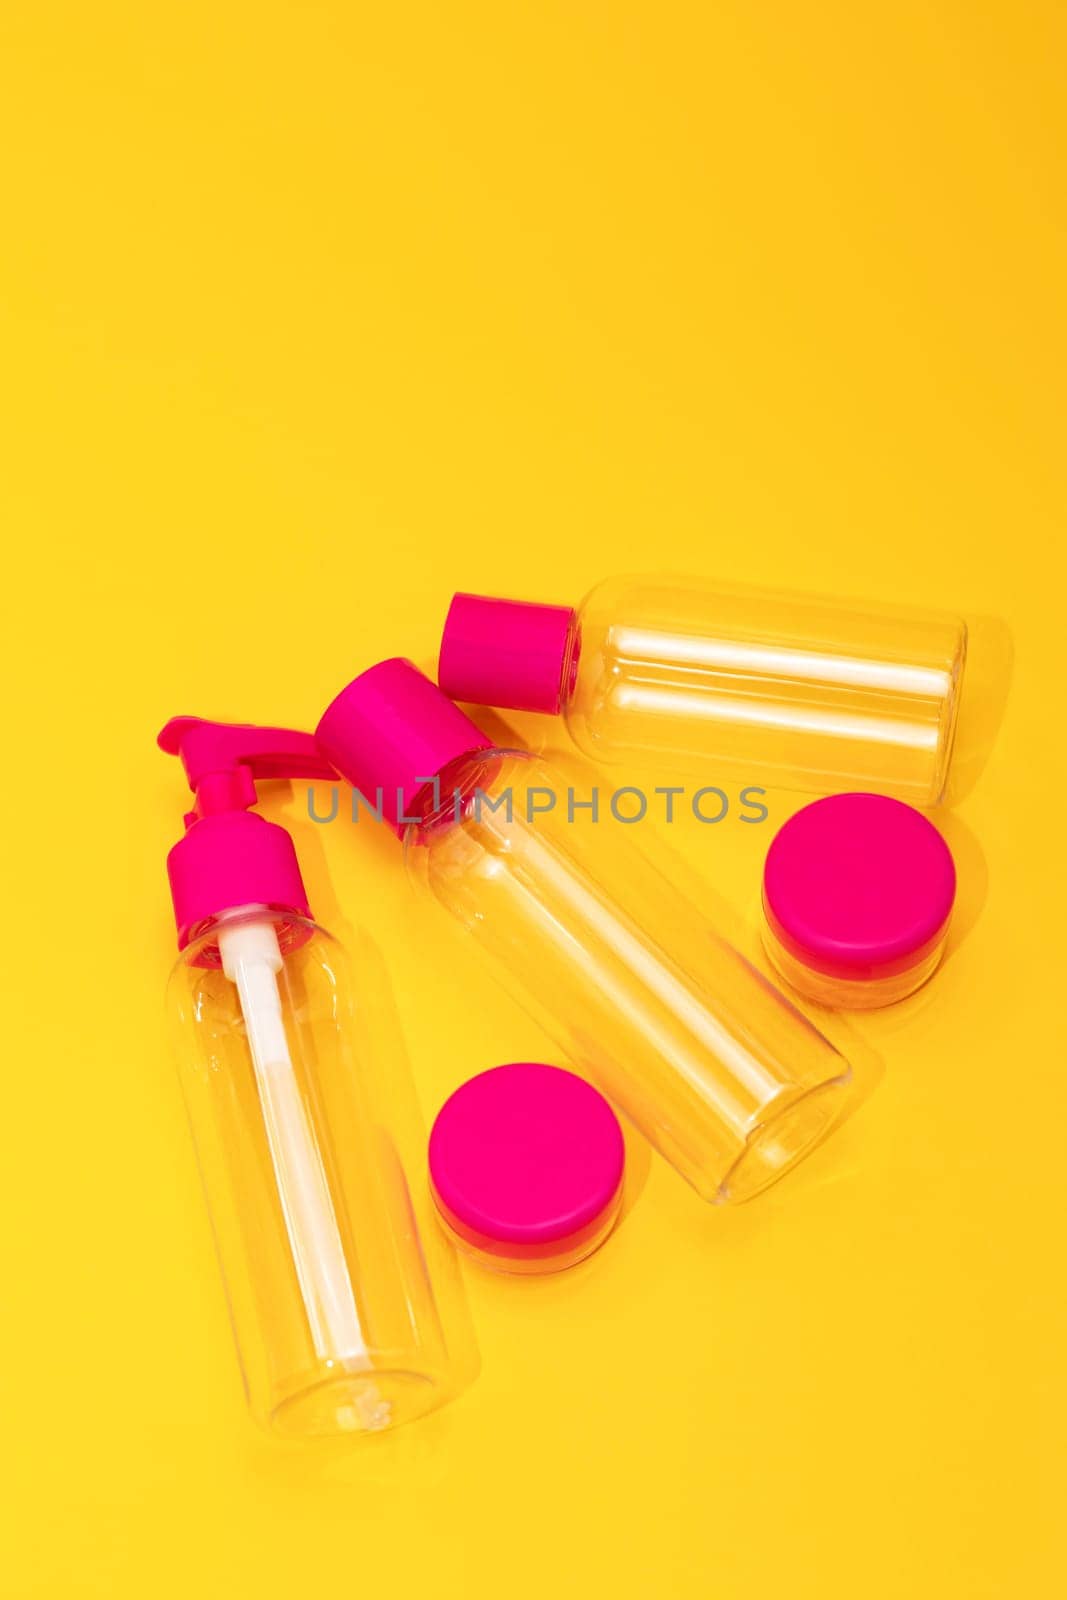 Top view travel bottle kit for liquids, cream. Toiletries Beauty Kit on yellow orange background. Airplane approved luggage reusable container size. Summer time, vacation. Vertical. Copy space.